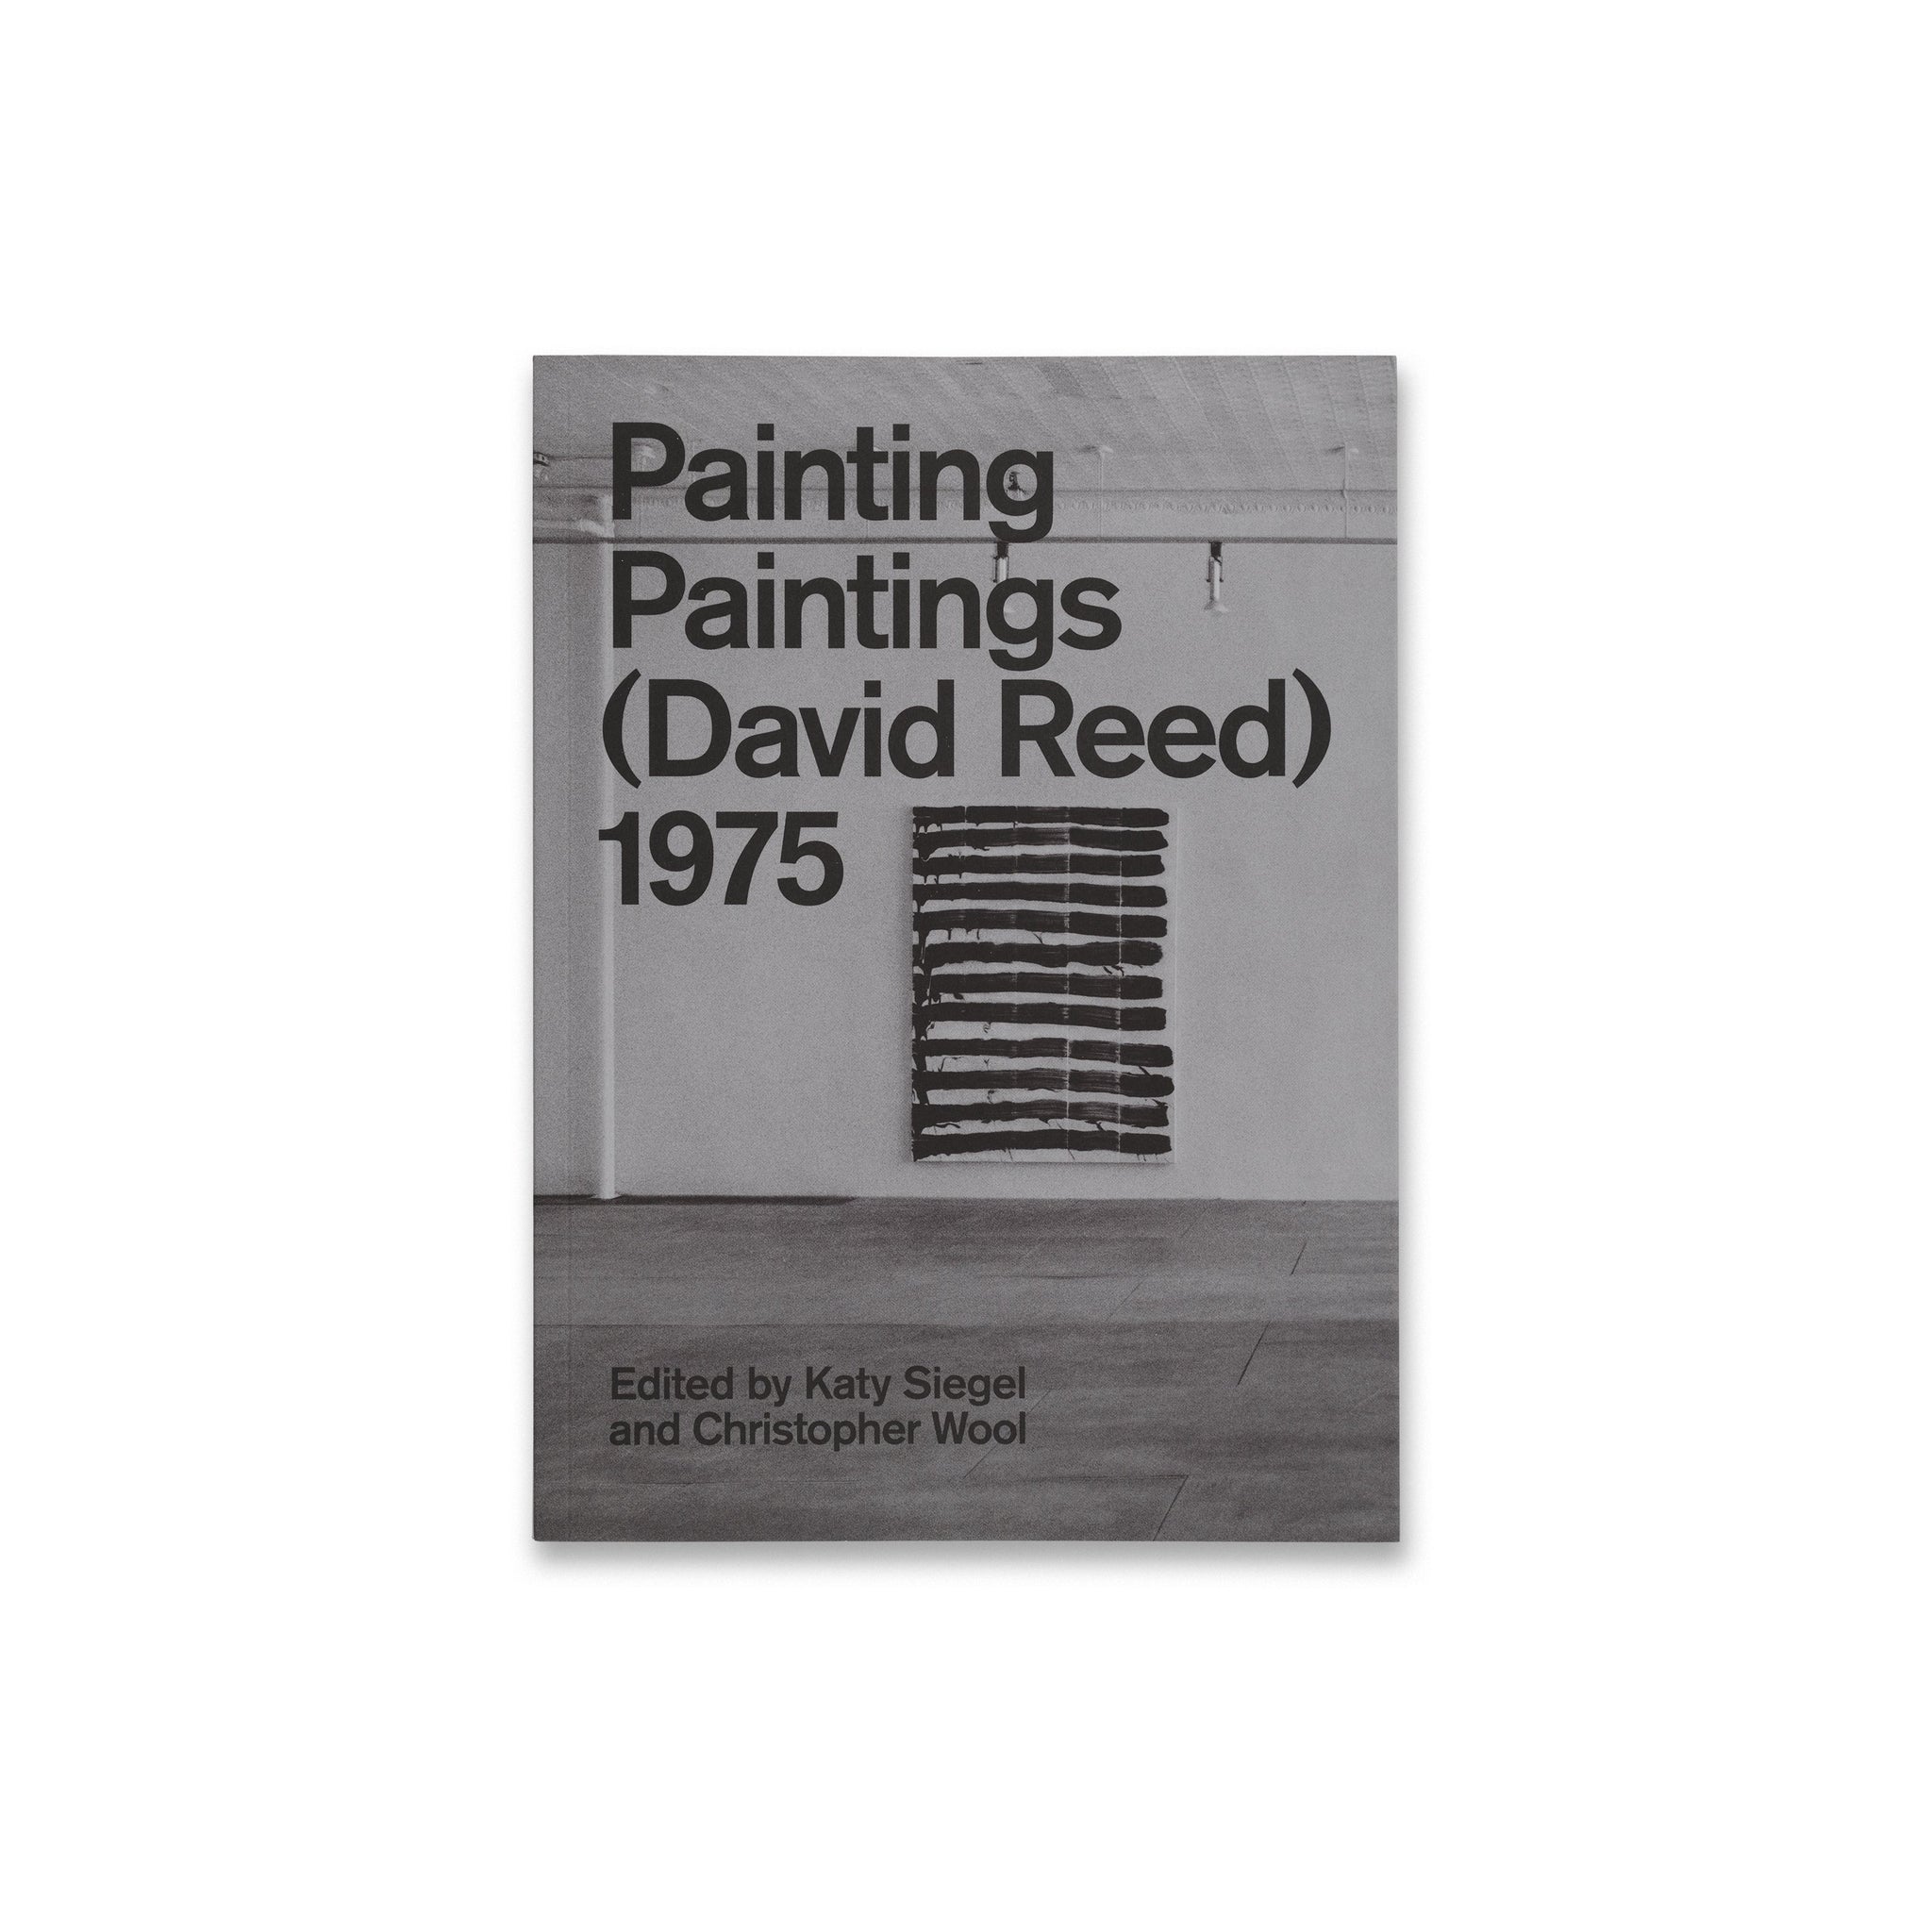 Cover of the book Painting Paintings (David Reed) 1975